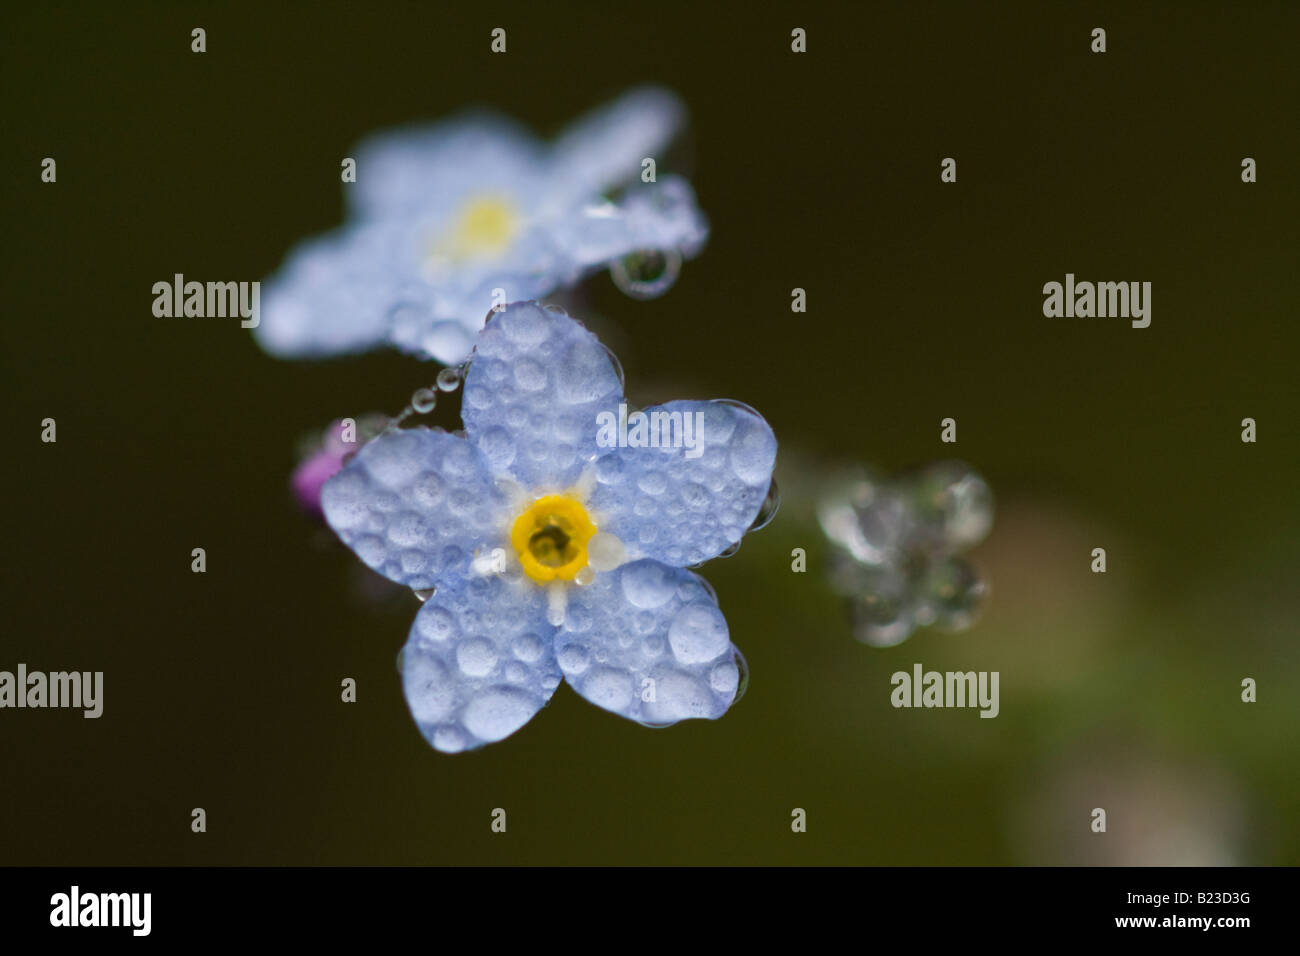 Macro image of Forget-me-not flower in morning dew Stock Photo